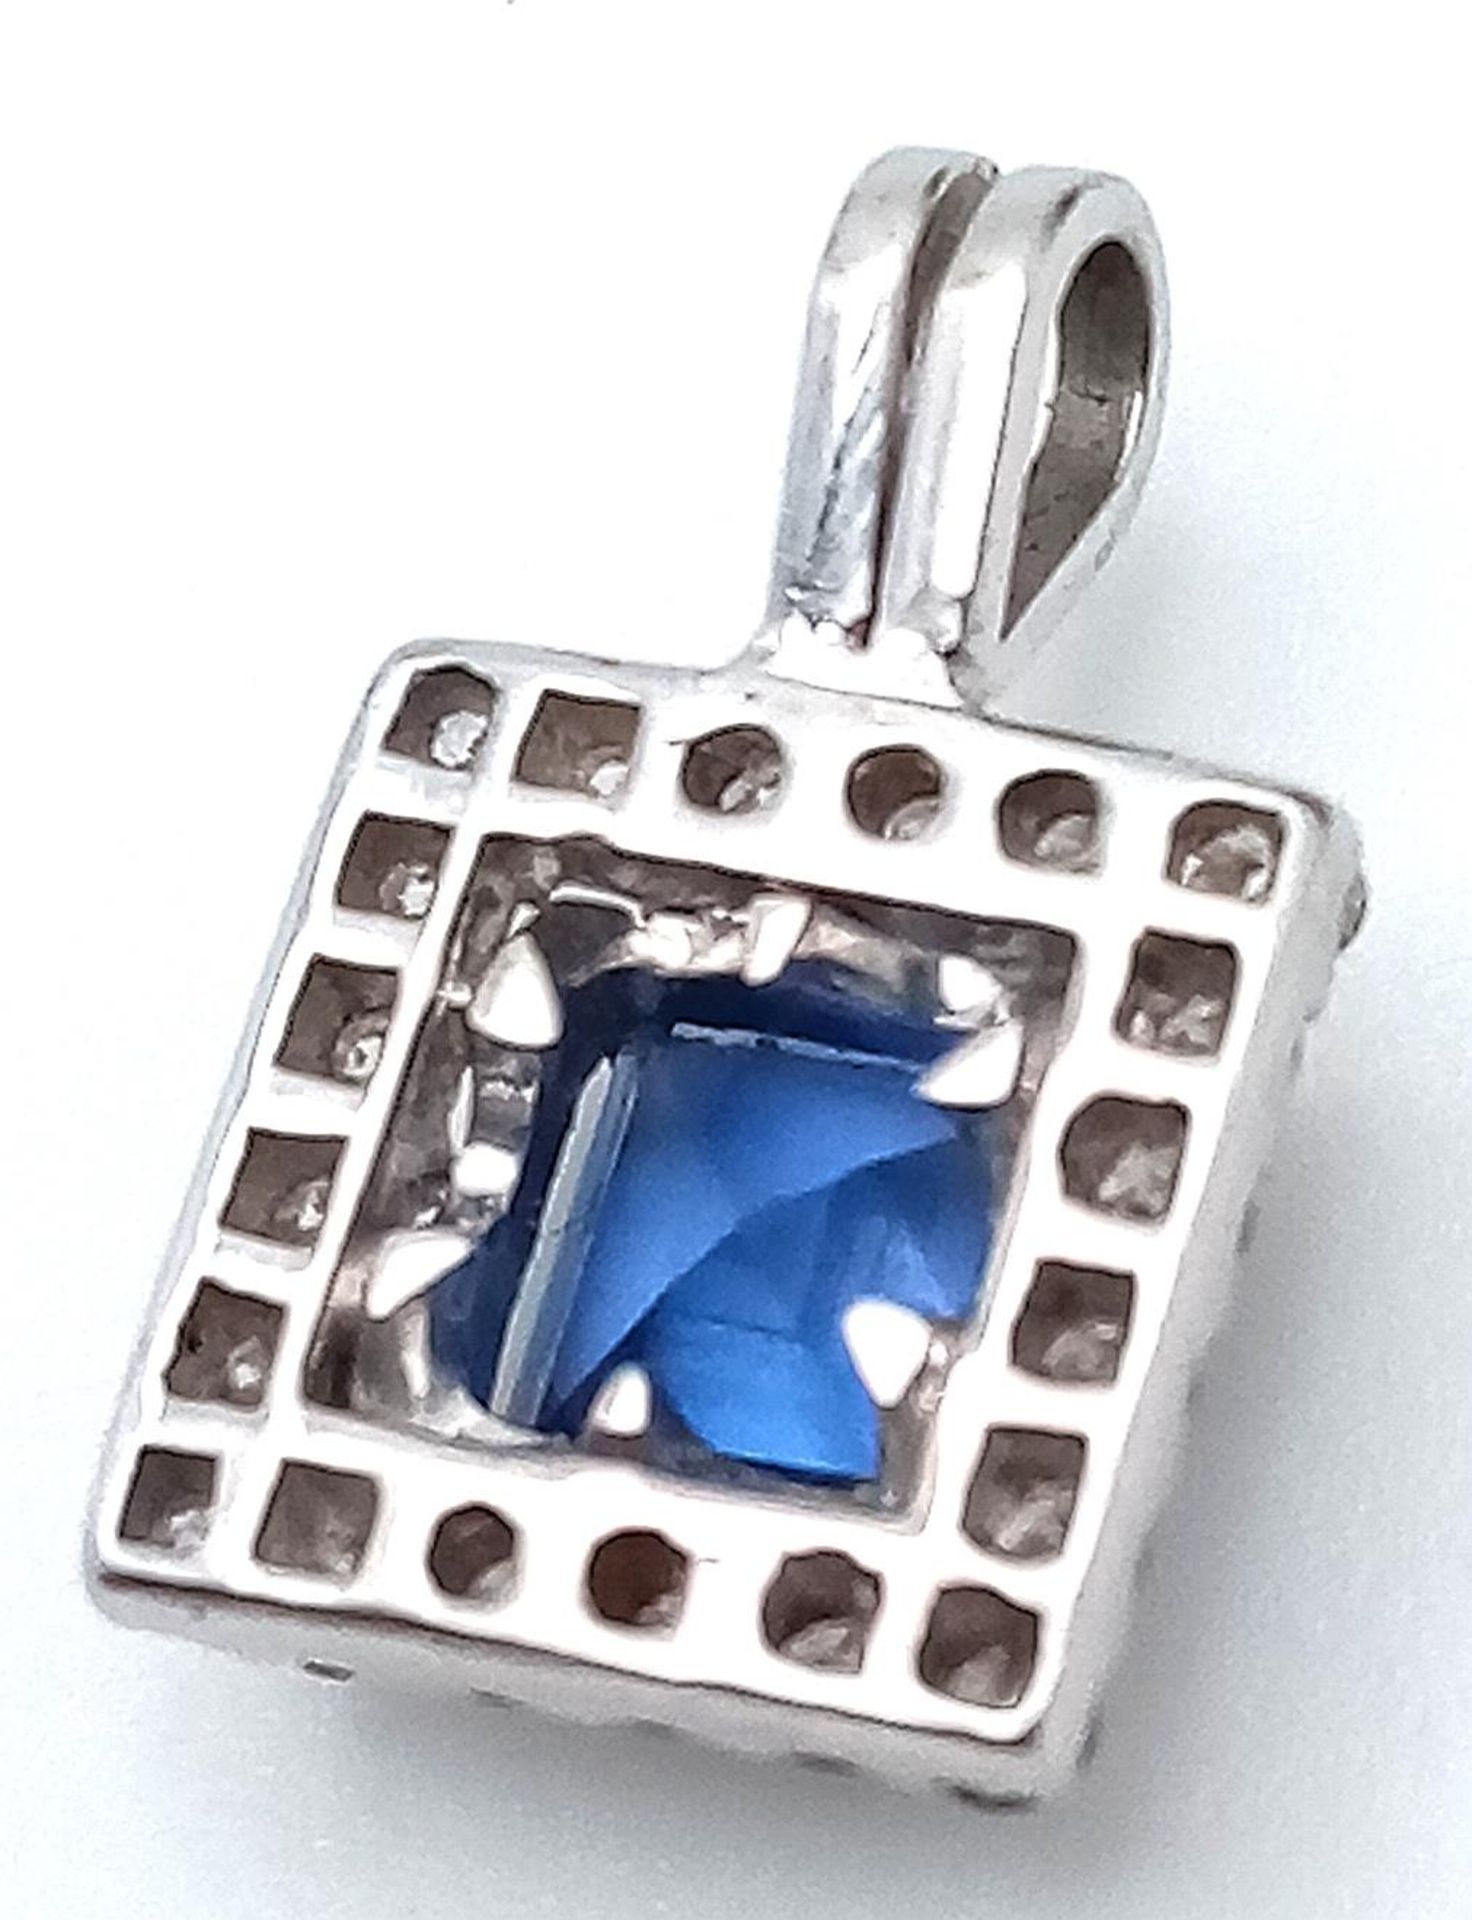 A 18K (TESTED AS) WHITE GOLD DIAMOND & SAPPHIRE PENDANT 1.02CT SAPPHIRE 1.6G. 14mm x 9mm. BL 9003 - Image 2 of 3